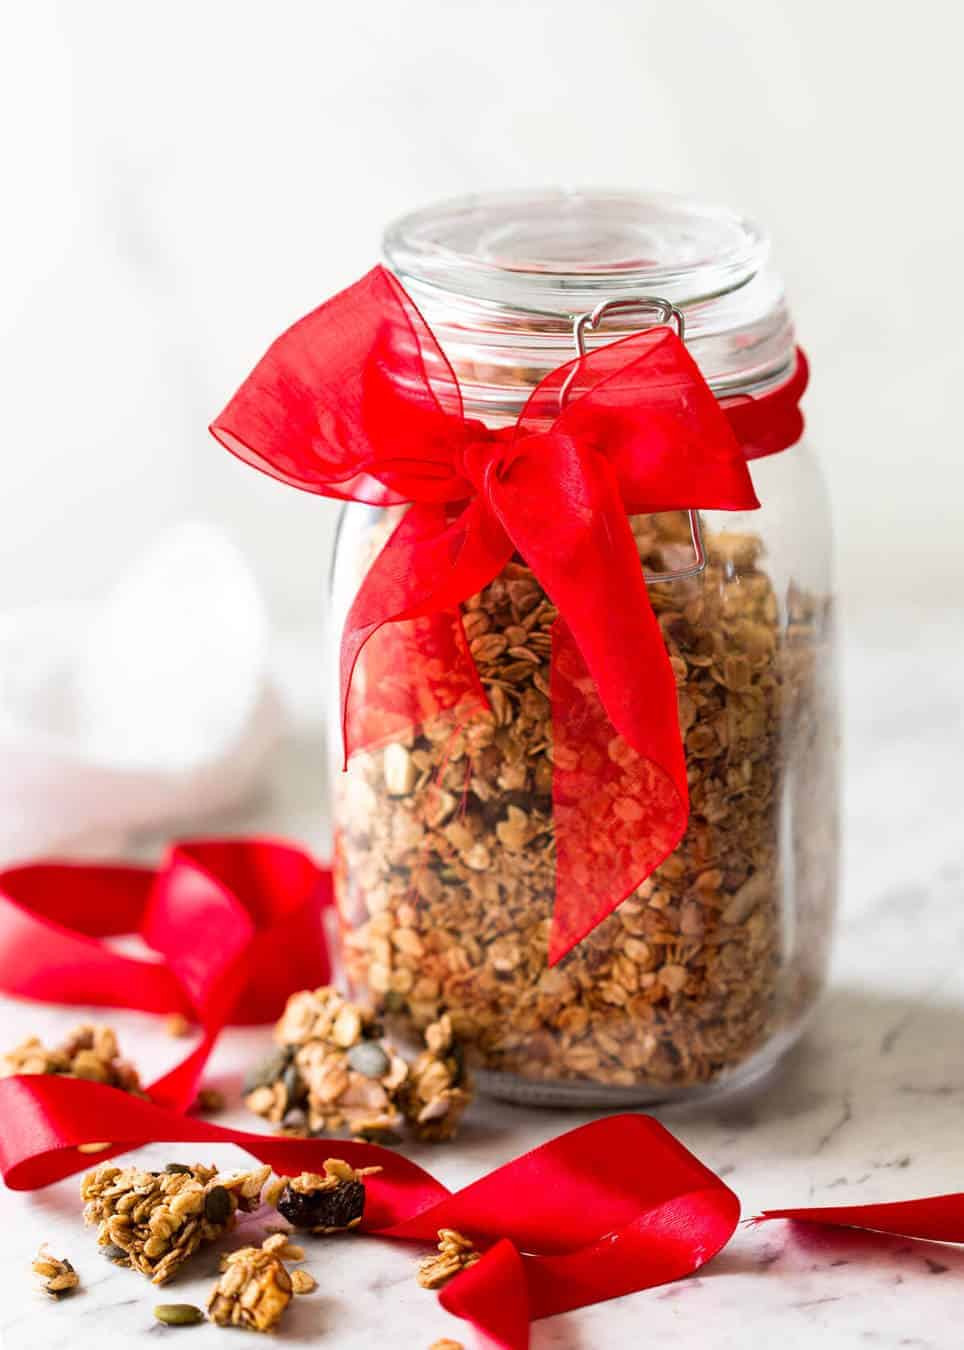 Build Your Own - Healthy Homemade Granola - Easy Food Gift Idea recipetineats.com